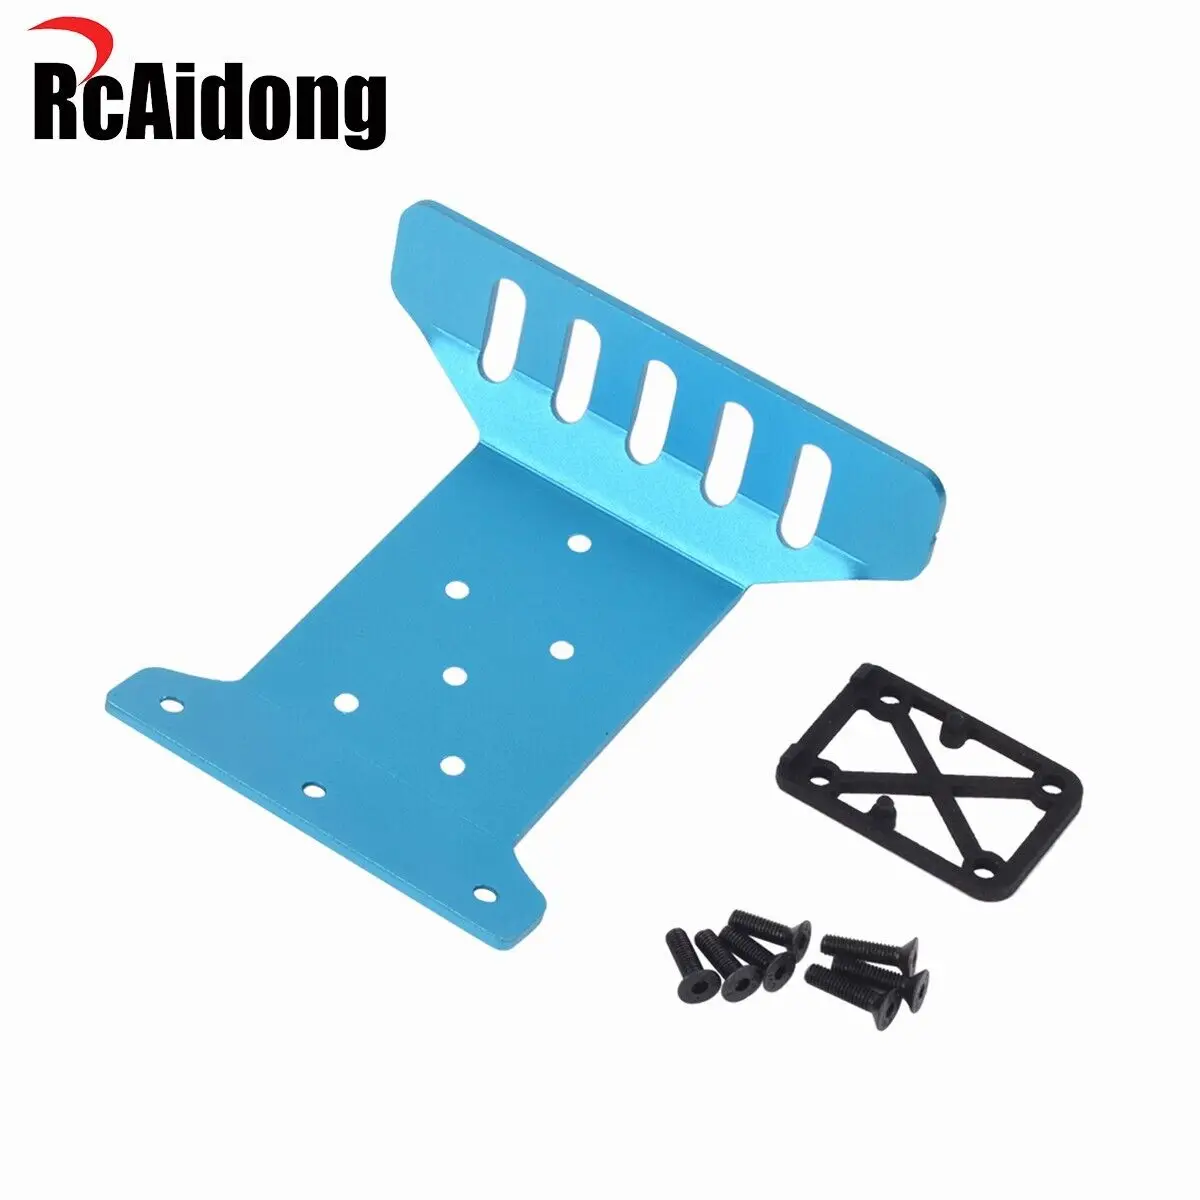 

RcAidong Aluminum Front Bumper For Tamiya DT-02 DT-02T Holiday Buggy